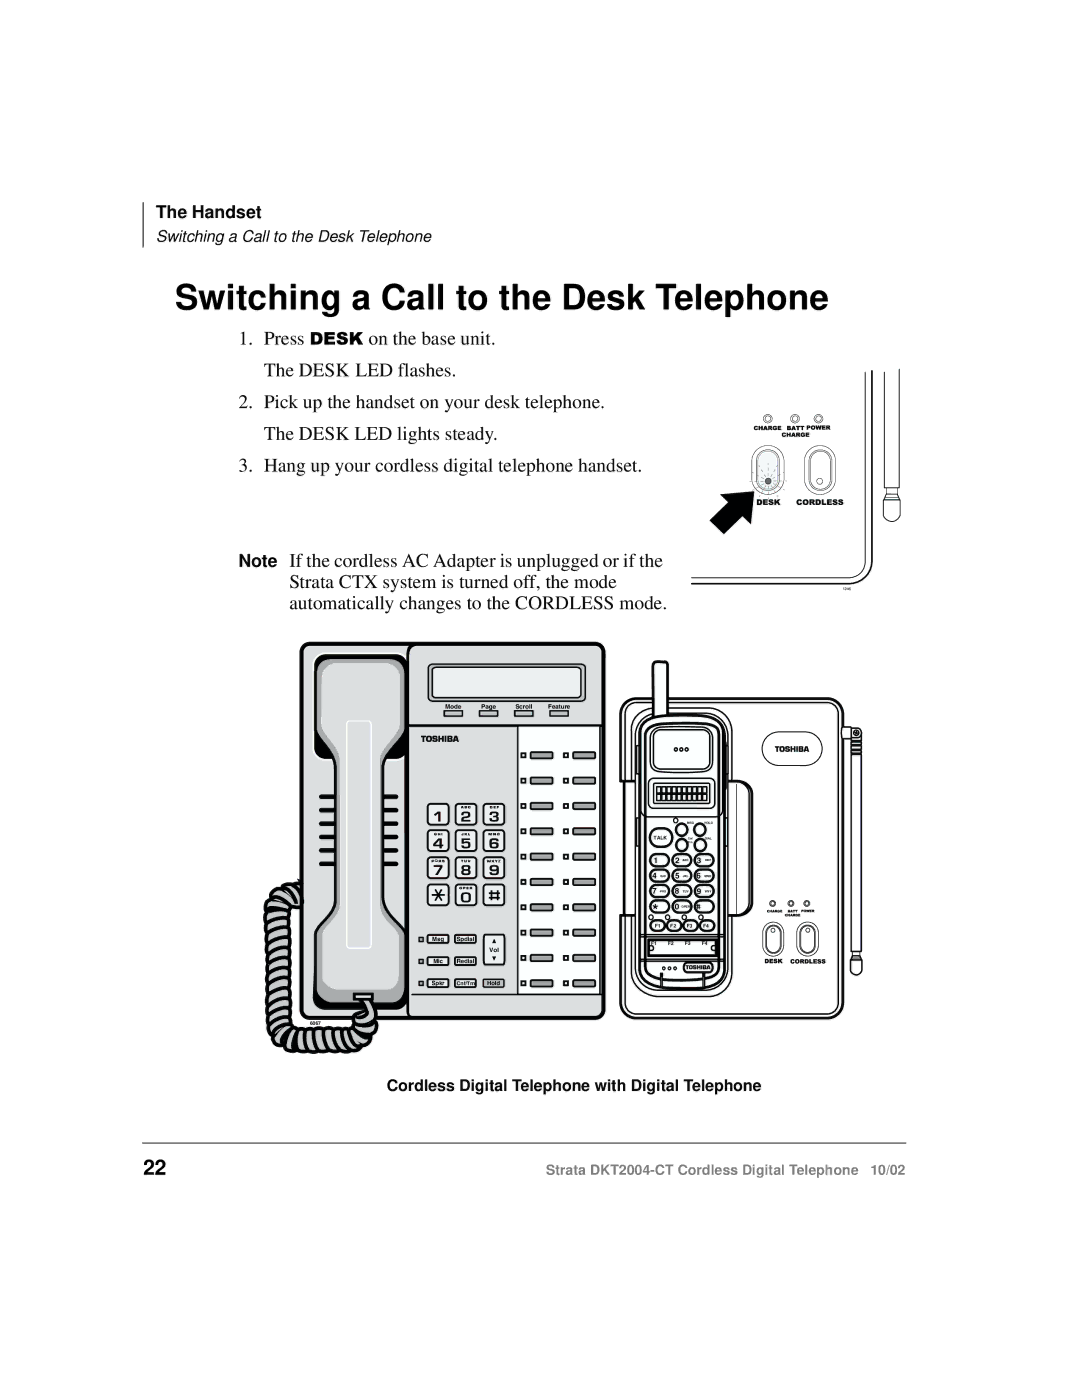 Toshiba DKT2004-CT manual Switching a Call to the Desk Telephone, Vol 